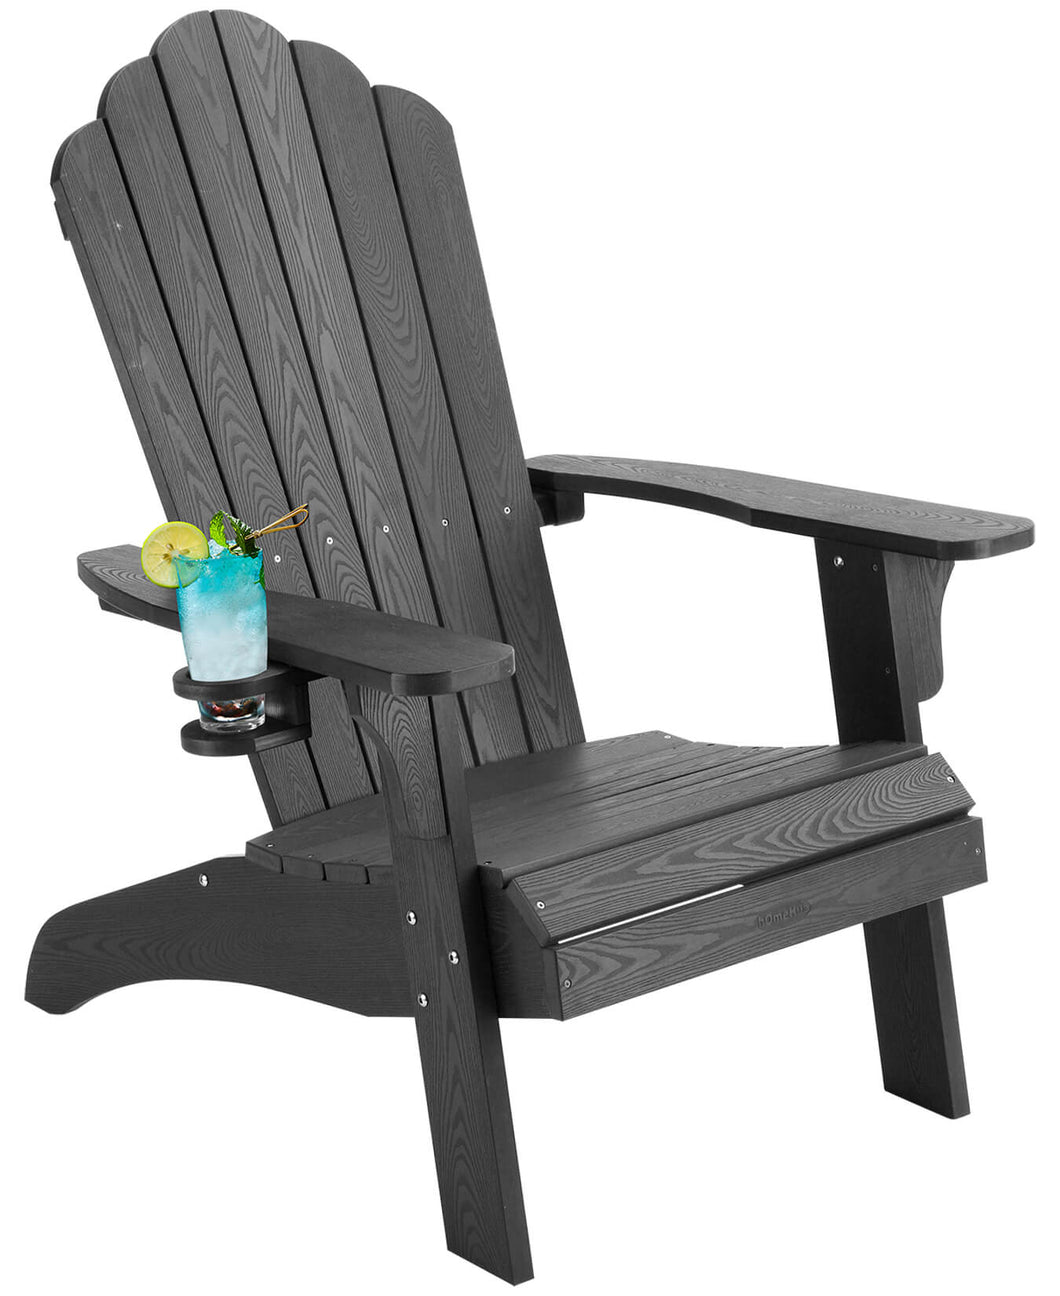 Oversized Adirondack Chair Weather Resistant with Cup Holder - Black